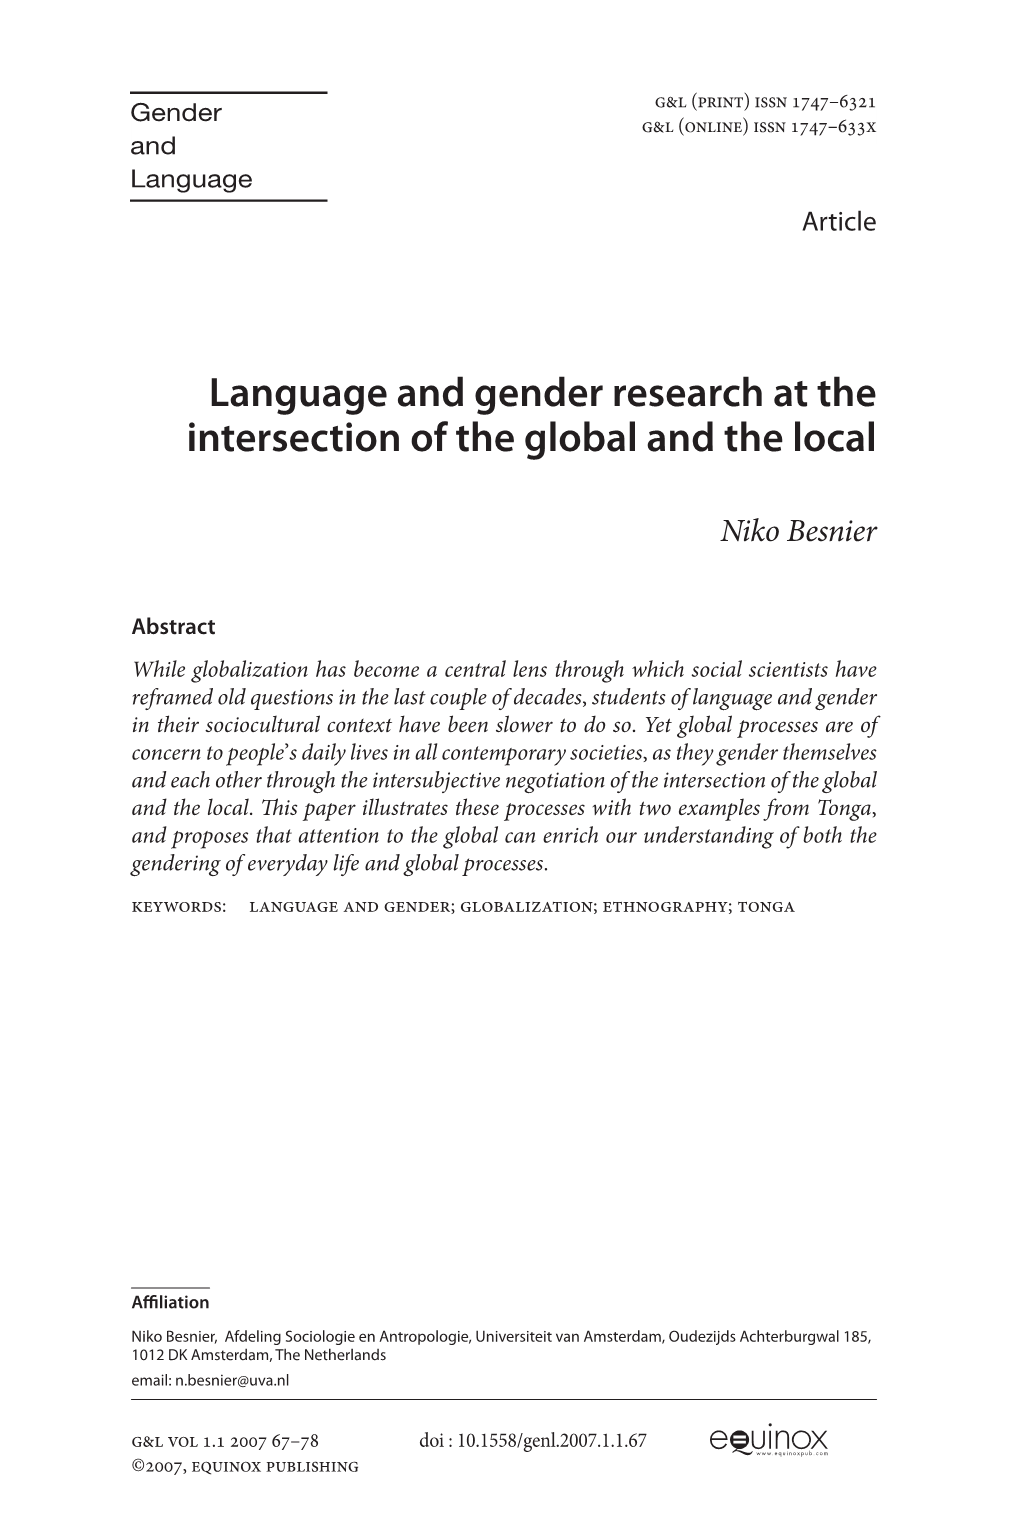 Language and Gender Research at the Intersection of the Global and the Local